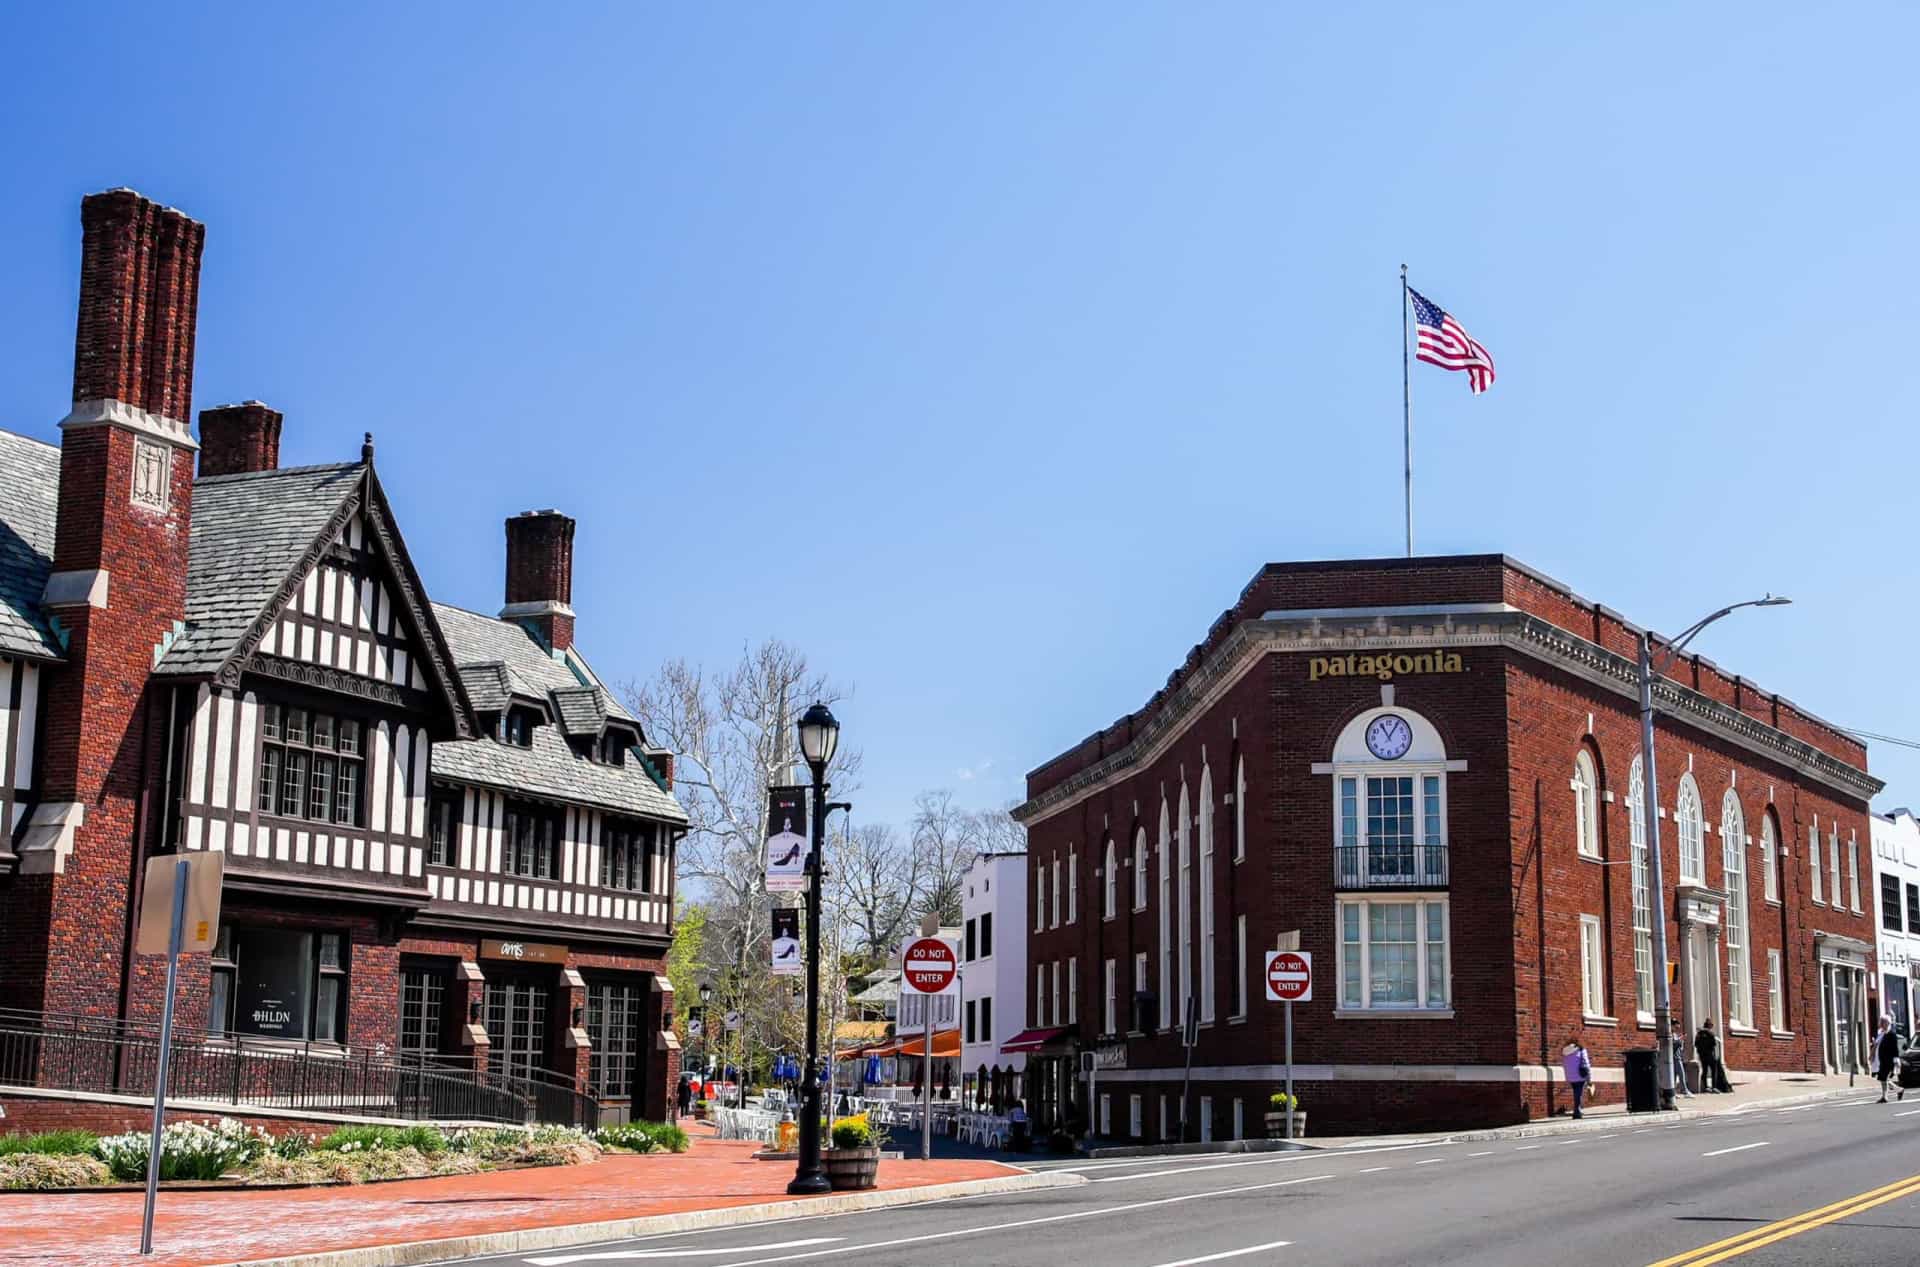 <p>The spruce town of Westport set along the Long Island Sound makes for a pleasant diversion, the mock-Tudor facades of many buildings lending the destination a decidedly British veneer.</p><p>You may also like: <a href="https://www.starsinsider.com/n/500518?utm_source=msn.com&utm_medium=display&utm_campaign=referral_description&utm_content=513982en-us">Curious facts you didn't know about the Vikings</a></p>